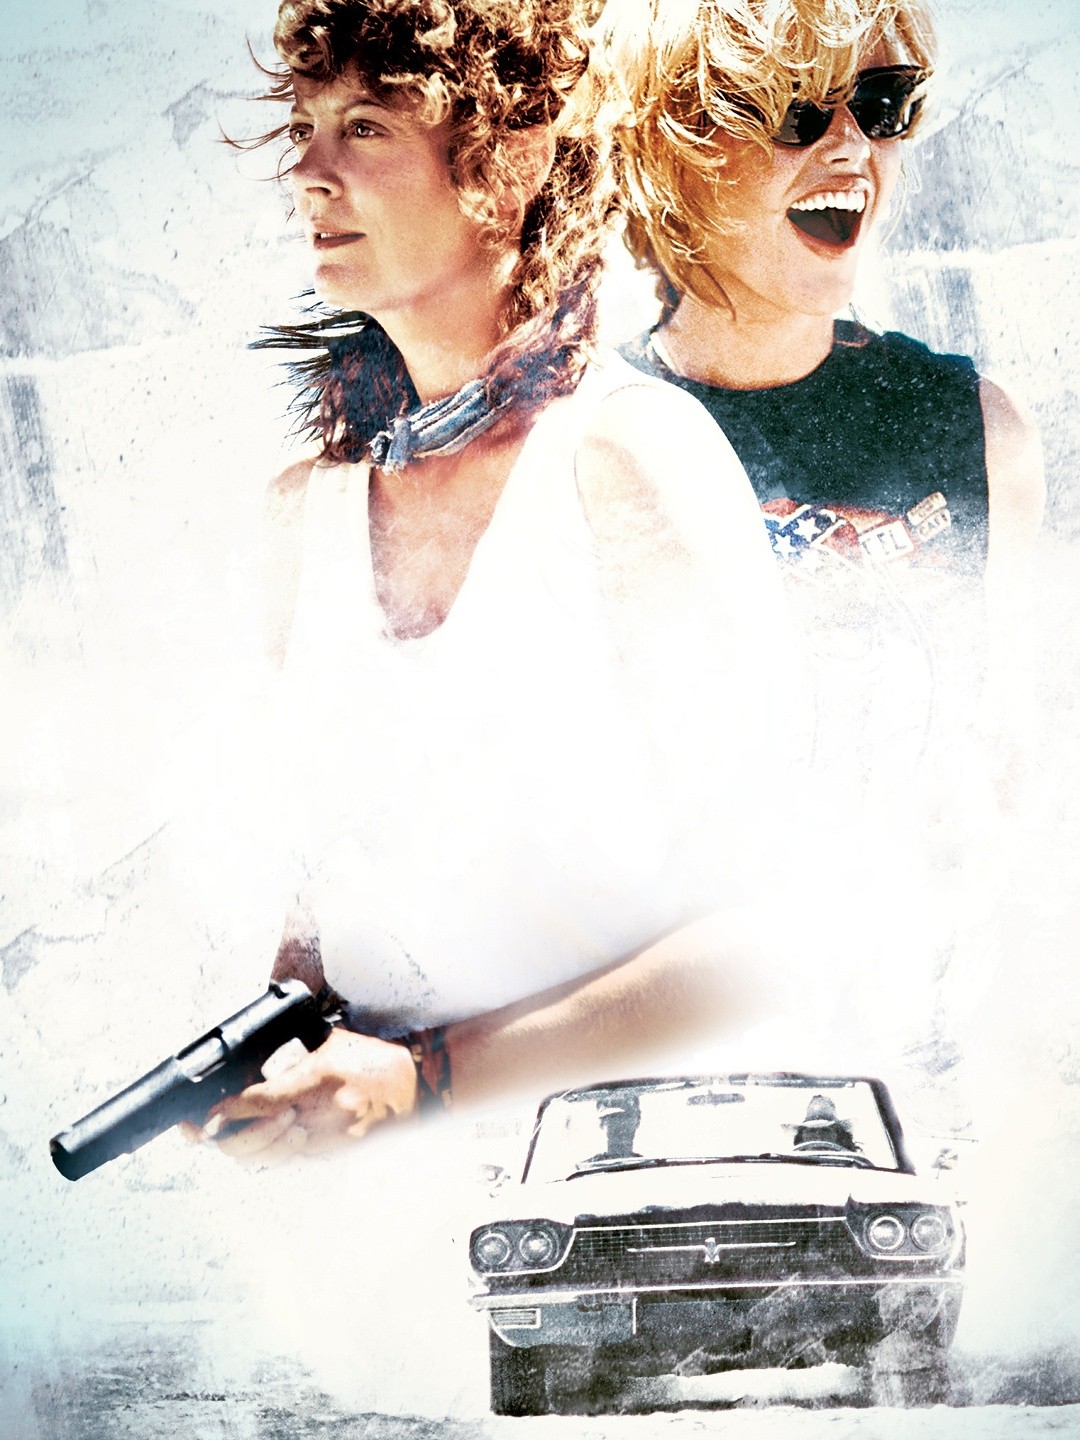 Thelma & Louise Hits The Road Once Again In A Director-approved 4k